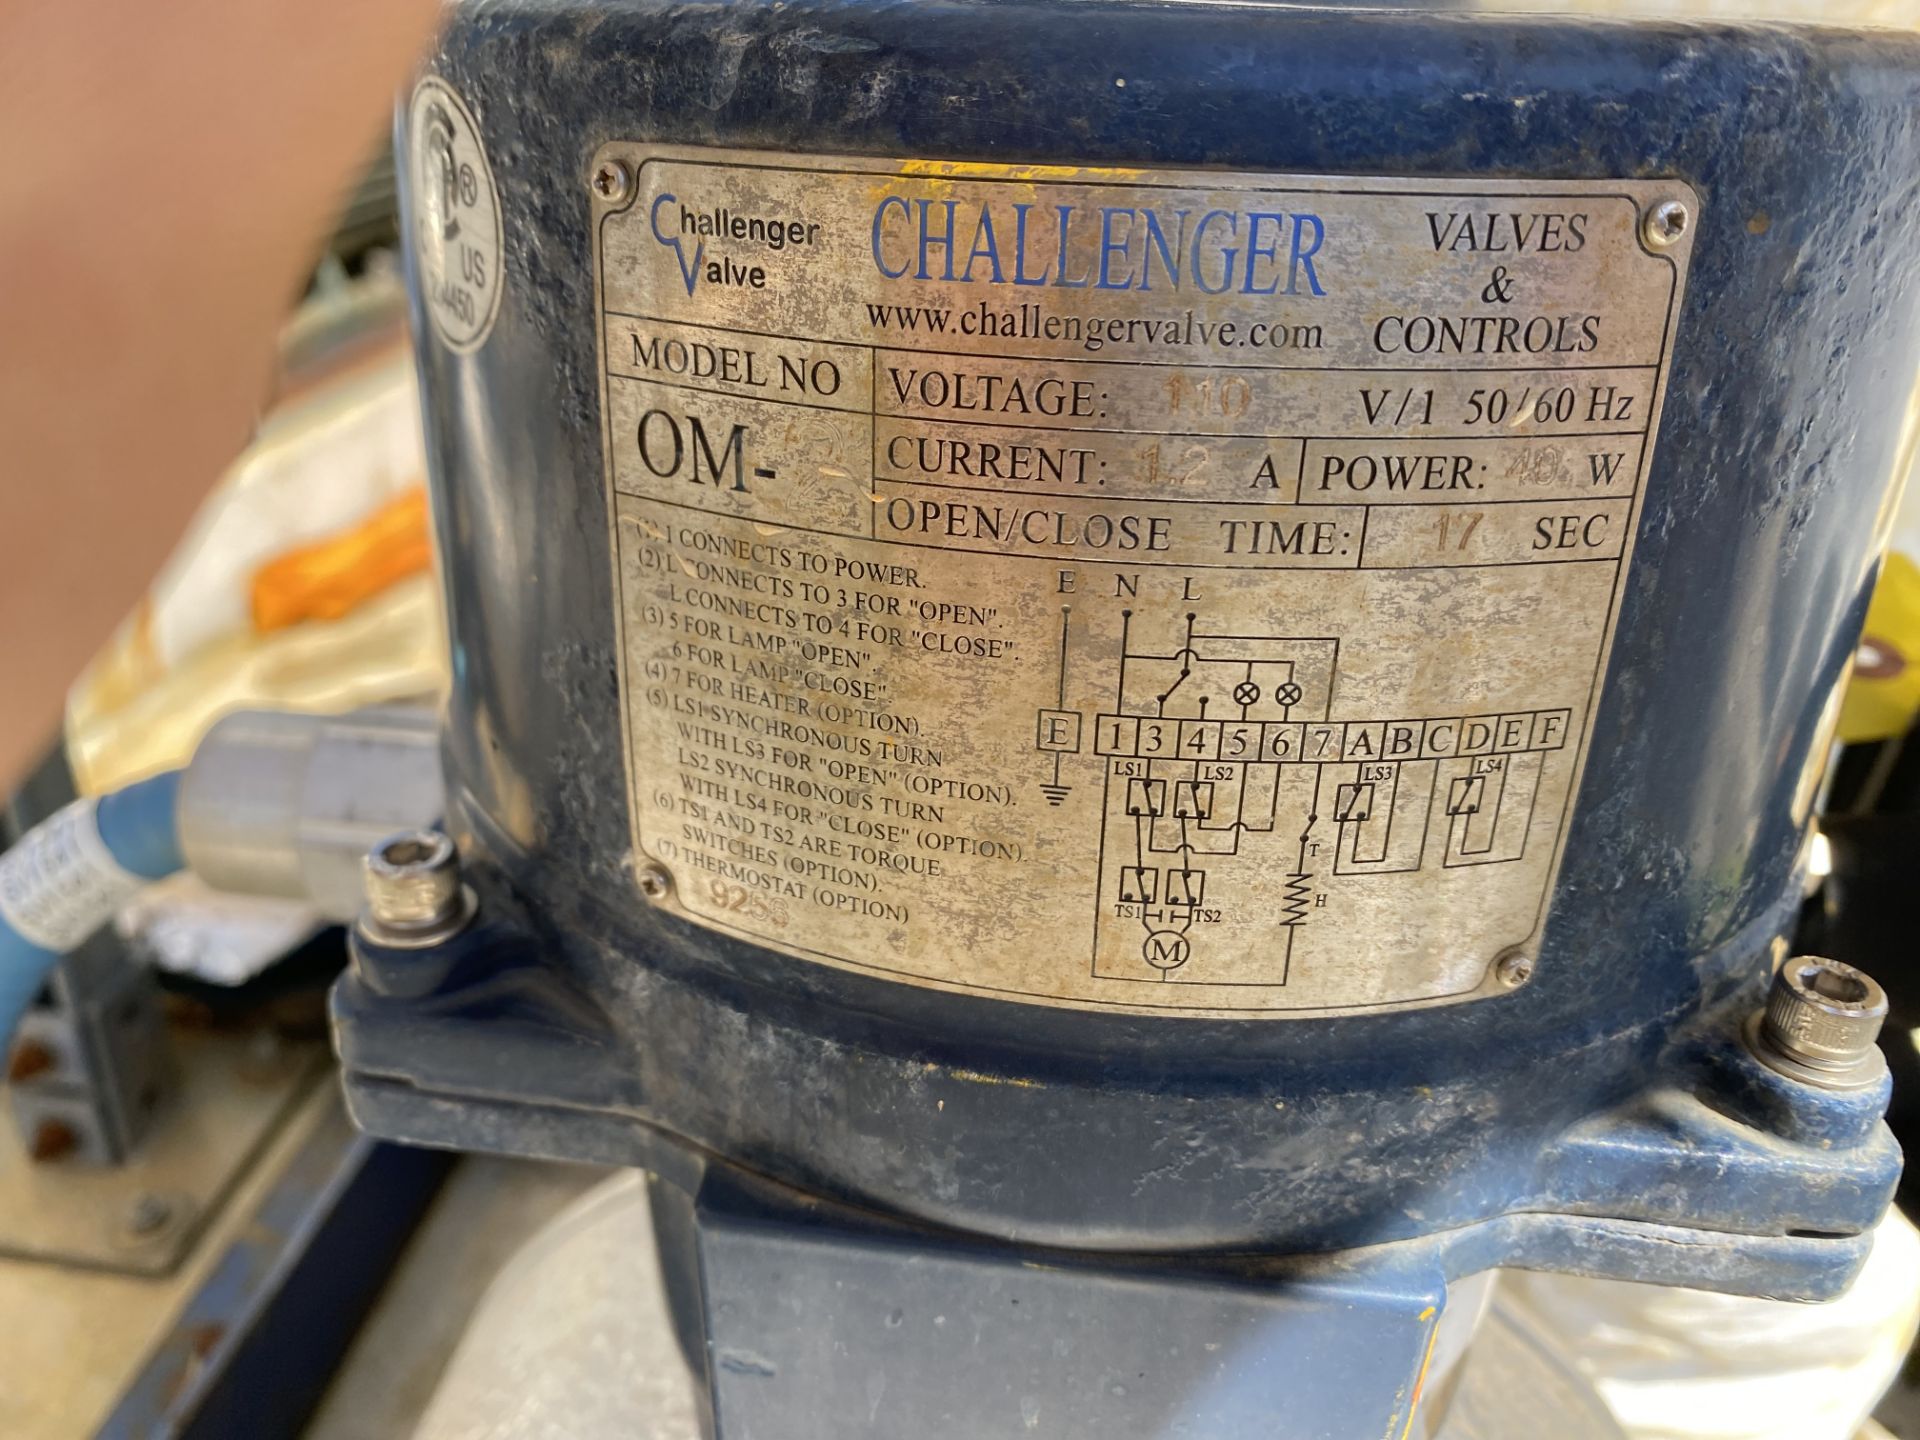 LOT OF (3) CHALLENGER CONTROL / FLOW VALVE W/ MANUAL CONTROL (RIGGING FEE $175 USD) - Image 3 of 3